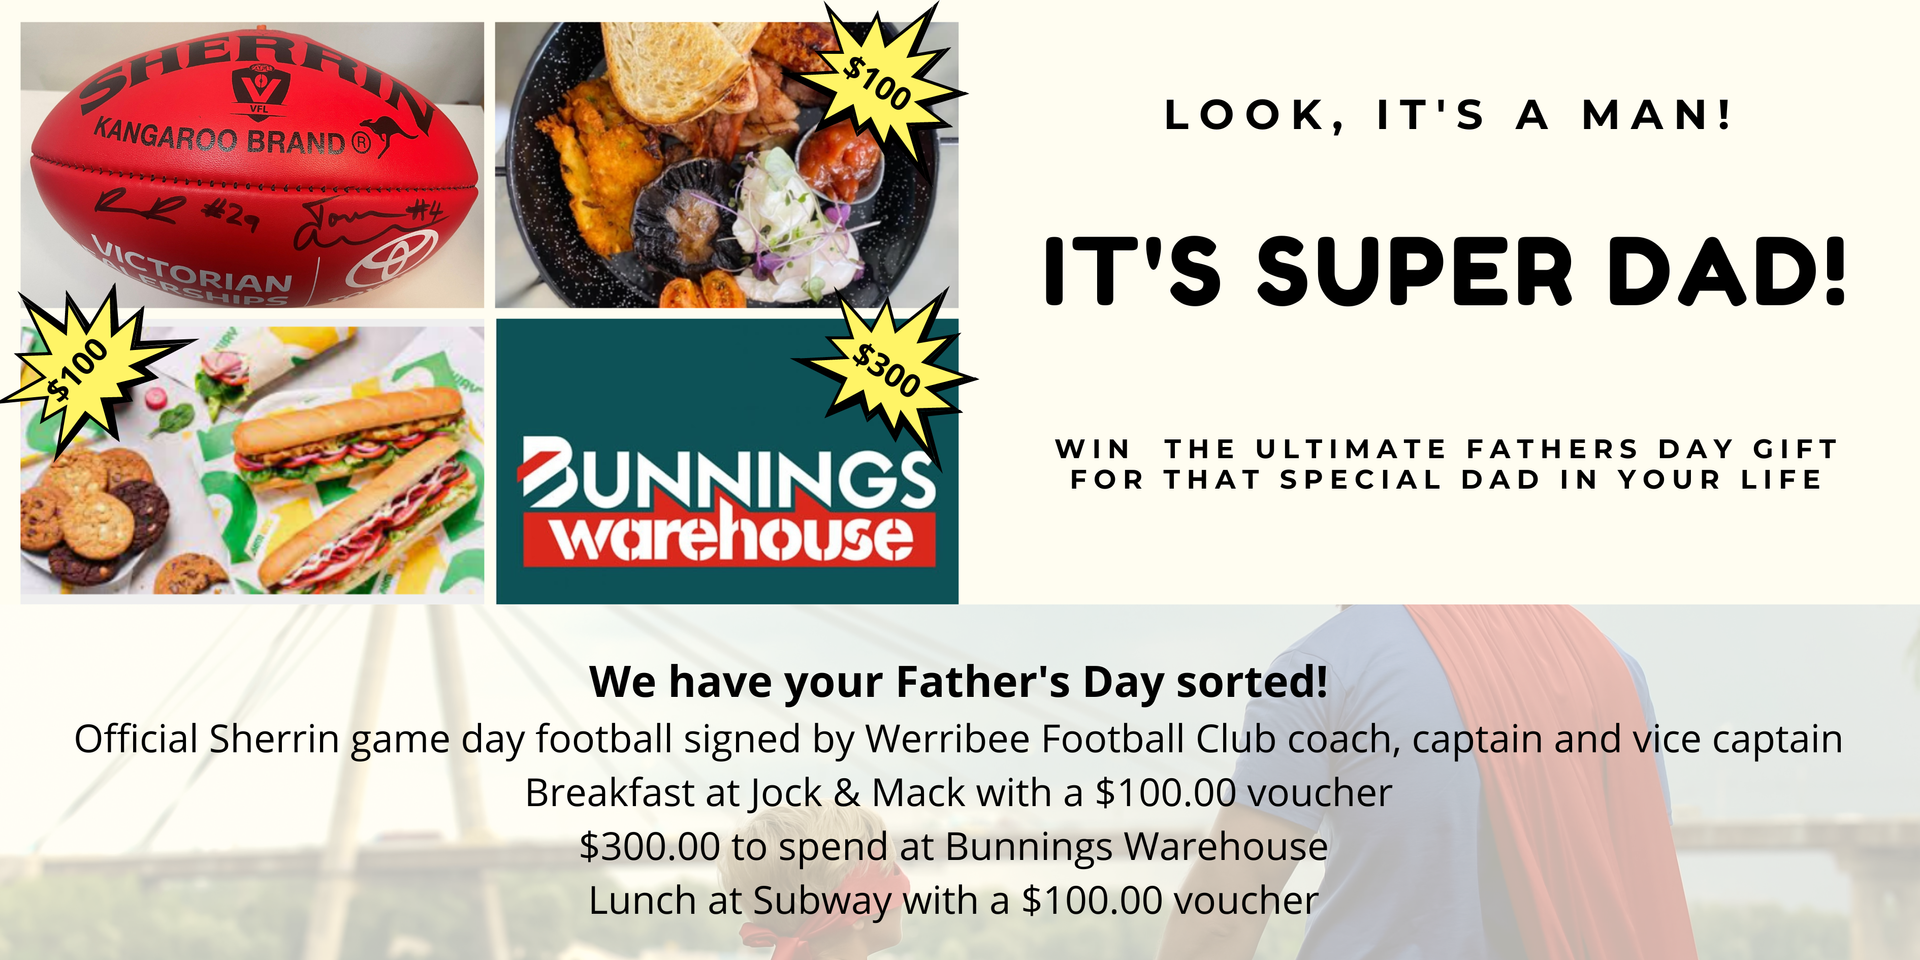 Win dad the ultimate Father's Day gift valued at $500